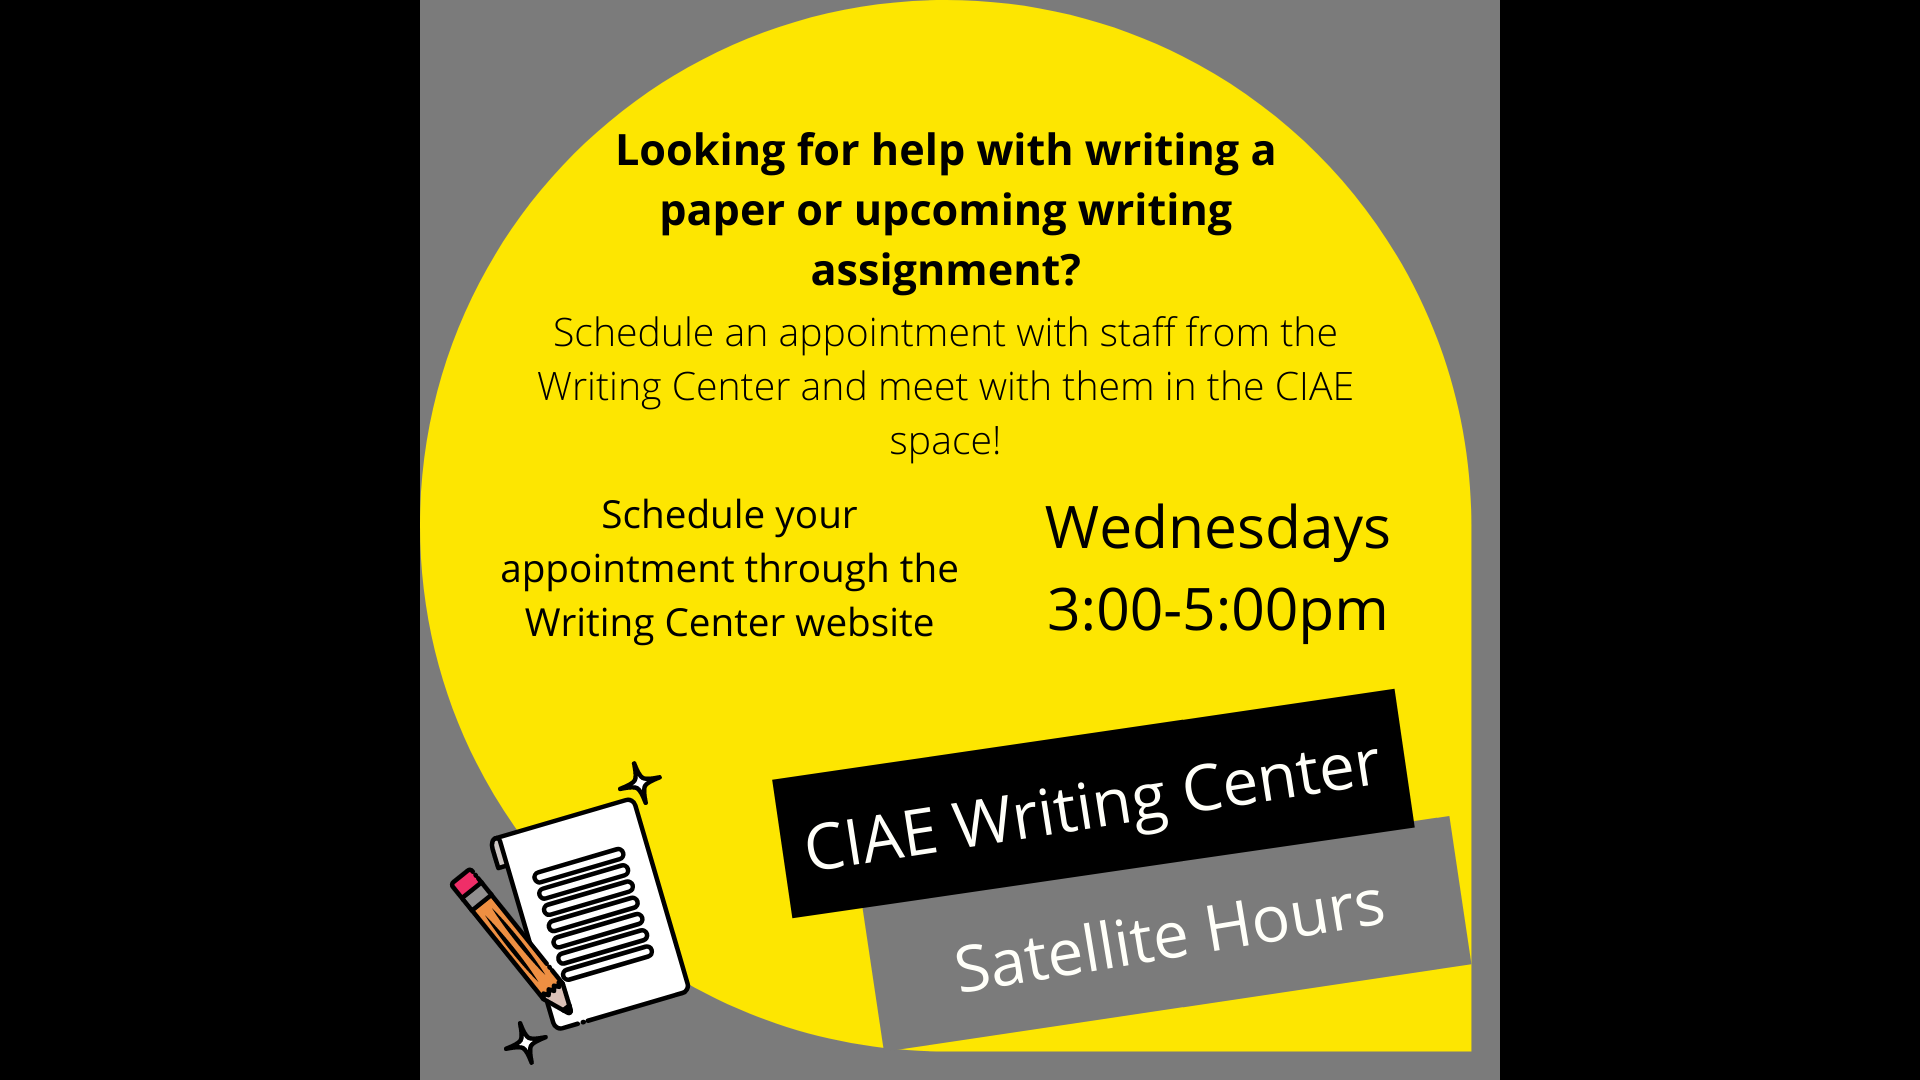 An ad with the following text: "Looking for help with a writing paper or upcoming writing assignment? Schedule an appointment with staff from the Writing Center and meet with them in the CIAE space! Schedule your appointment through the Writing Center website. Wednesdays 3:00 - 5:00 PM. CIAE Writing Center Satellite Hours."